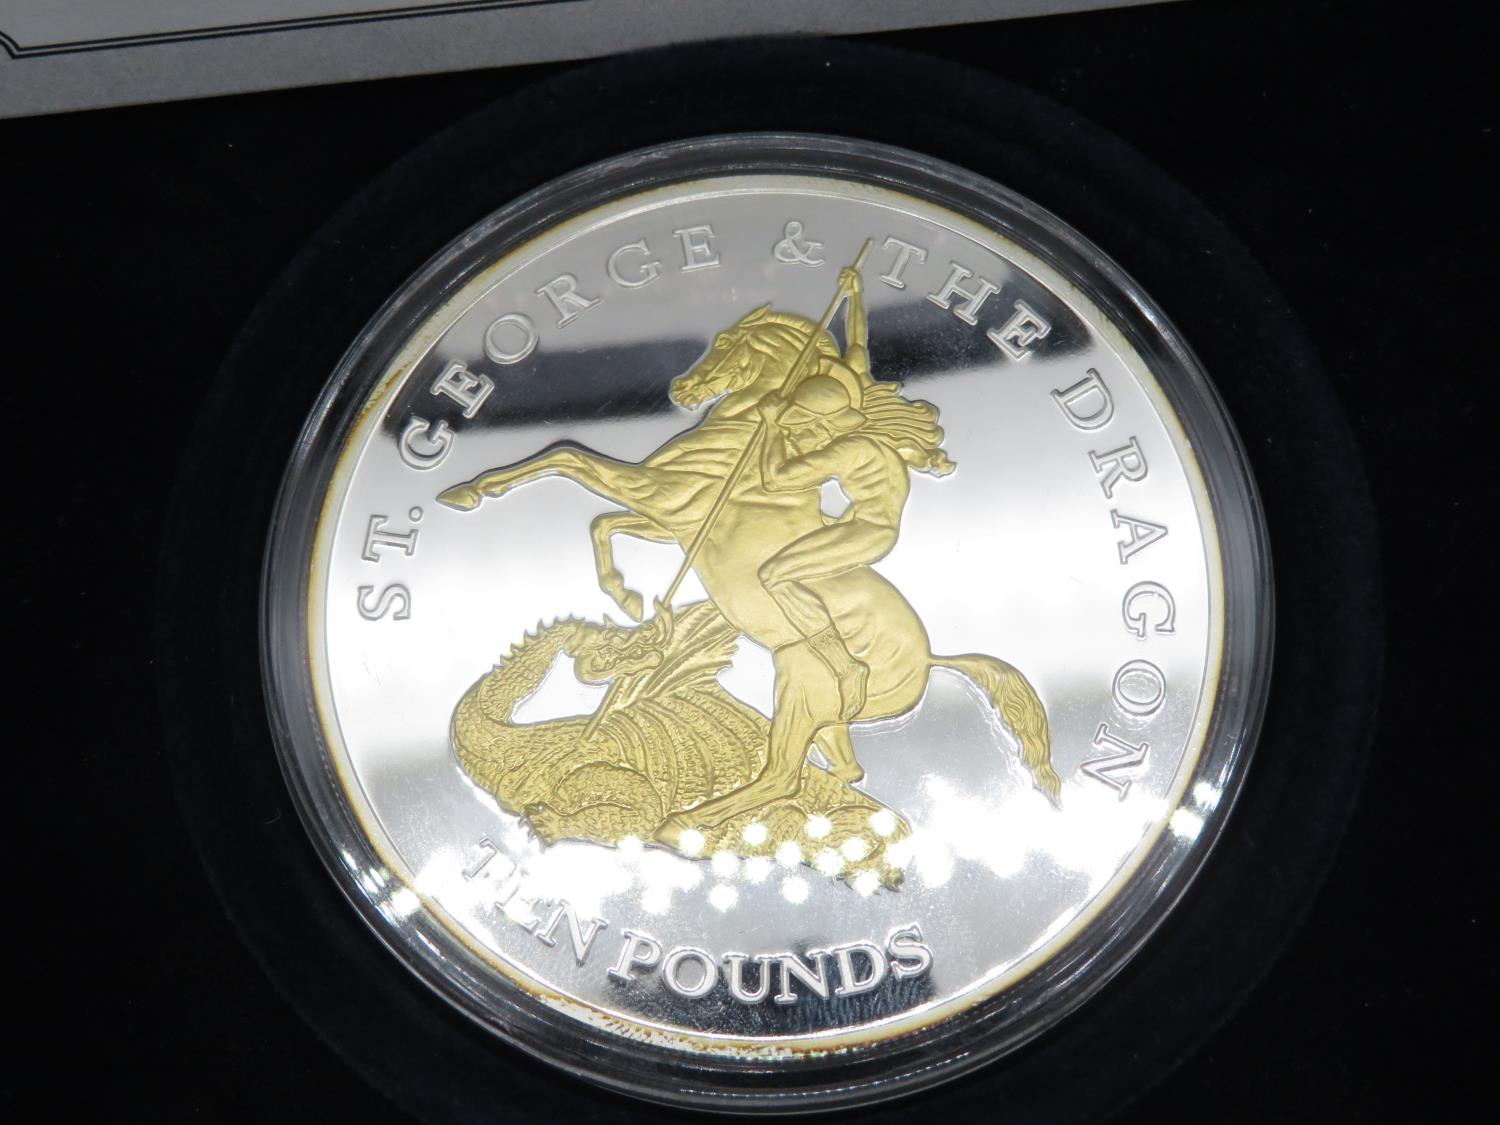 2009 jersey st George and dragon 5 once silver coin 9999 silver - Image 2 of 2